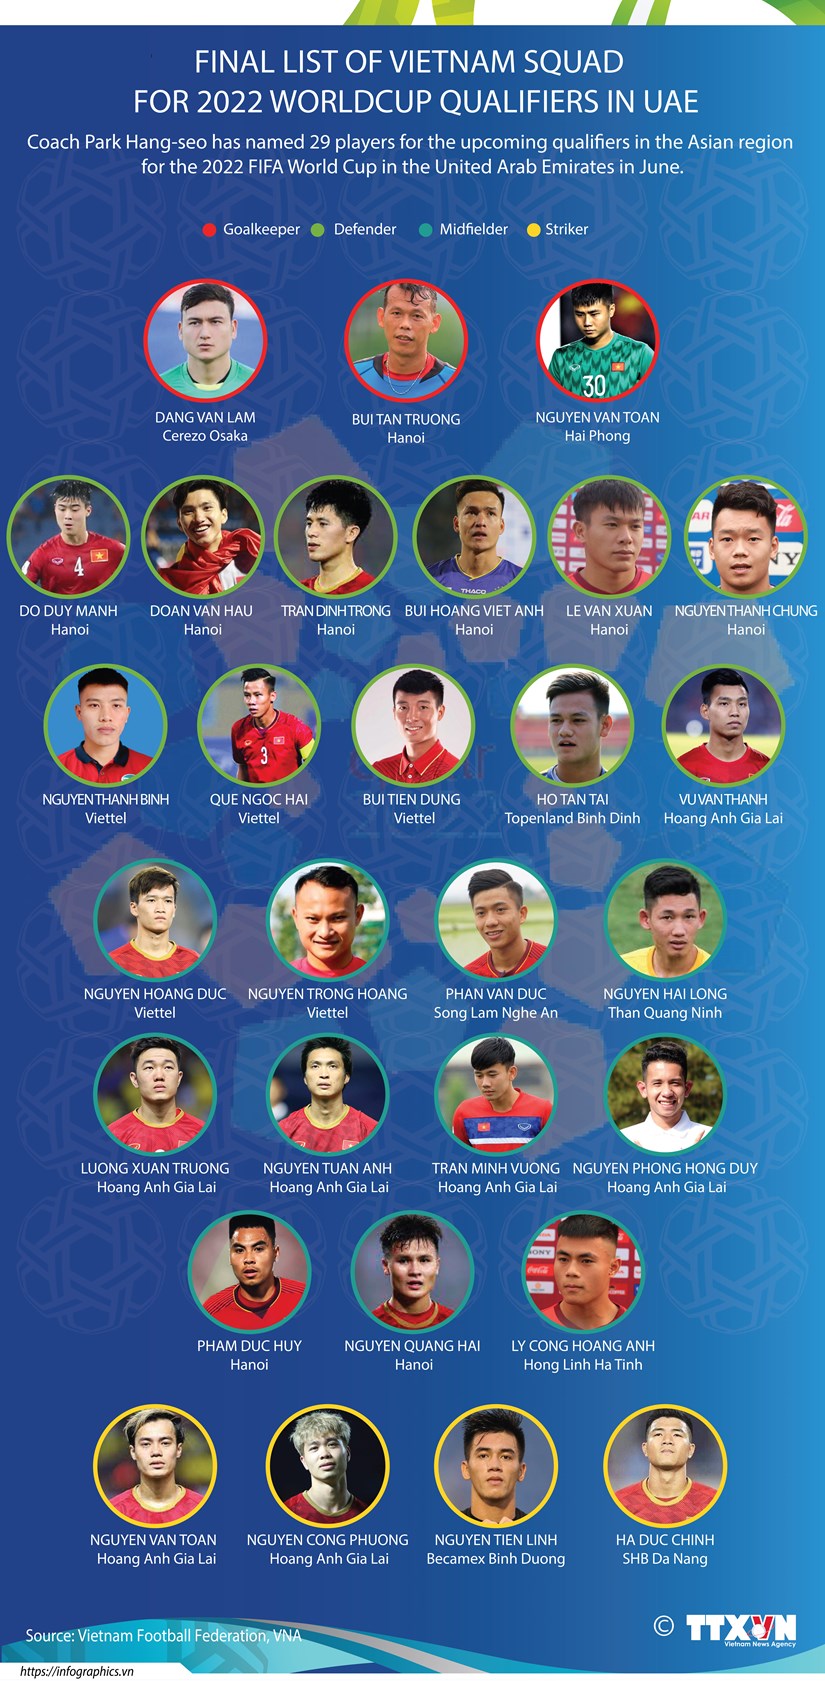 Final list of Vietnam squad for 2022 Worldcup qualifiers in UAE hinh anh 1